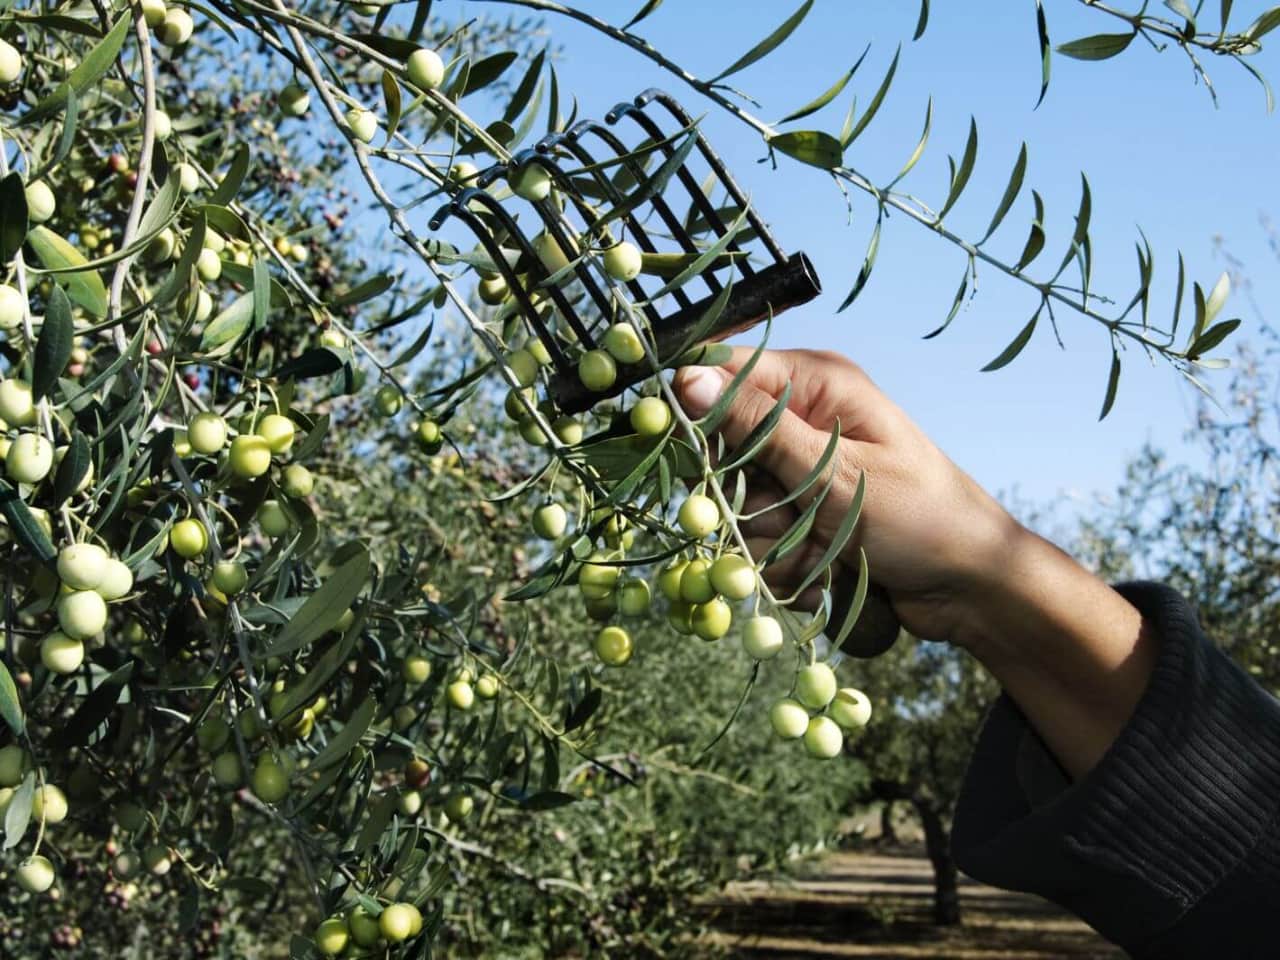 What makes the Olive Tree, and specifically Olive Oil, so special?